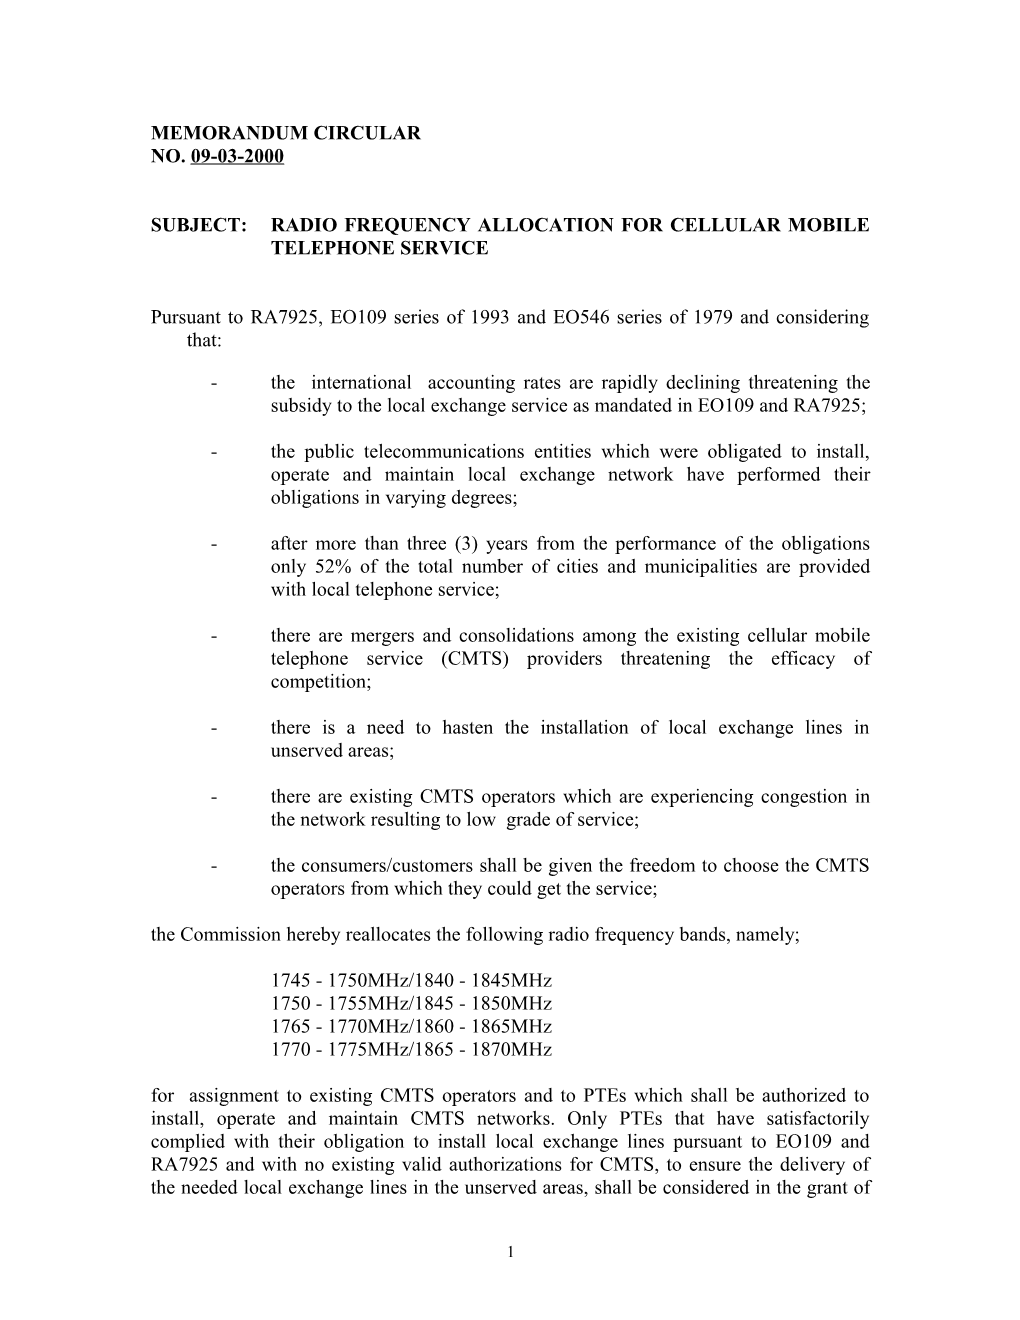 Subject: Radio Frequency Allocation for Cellular Mobiletelephone Service